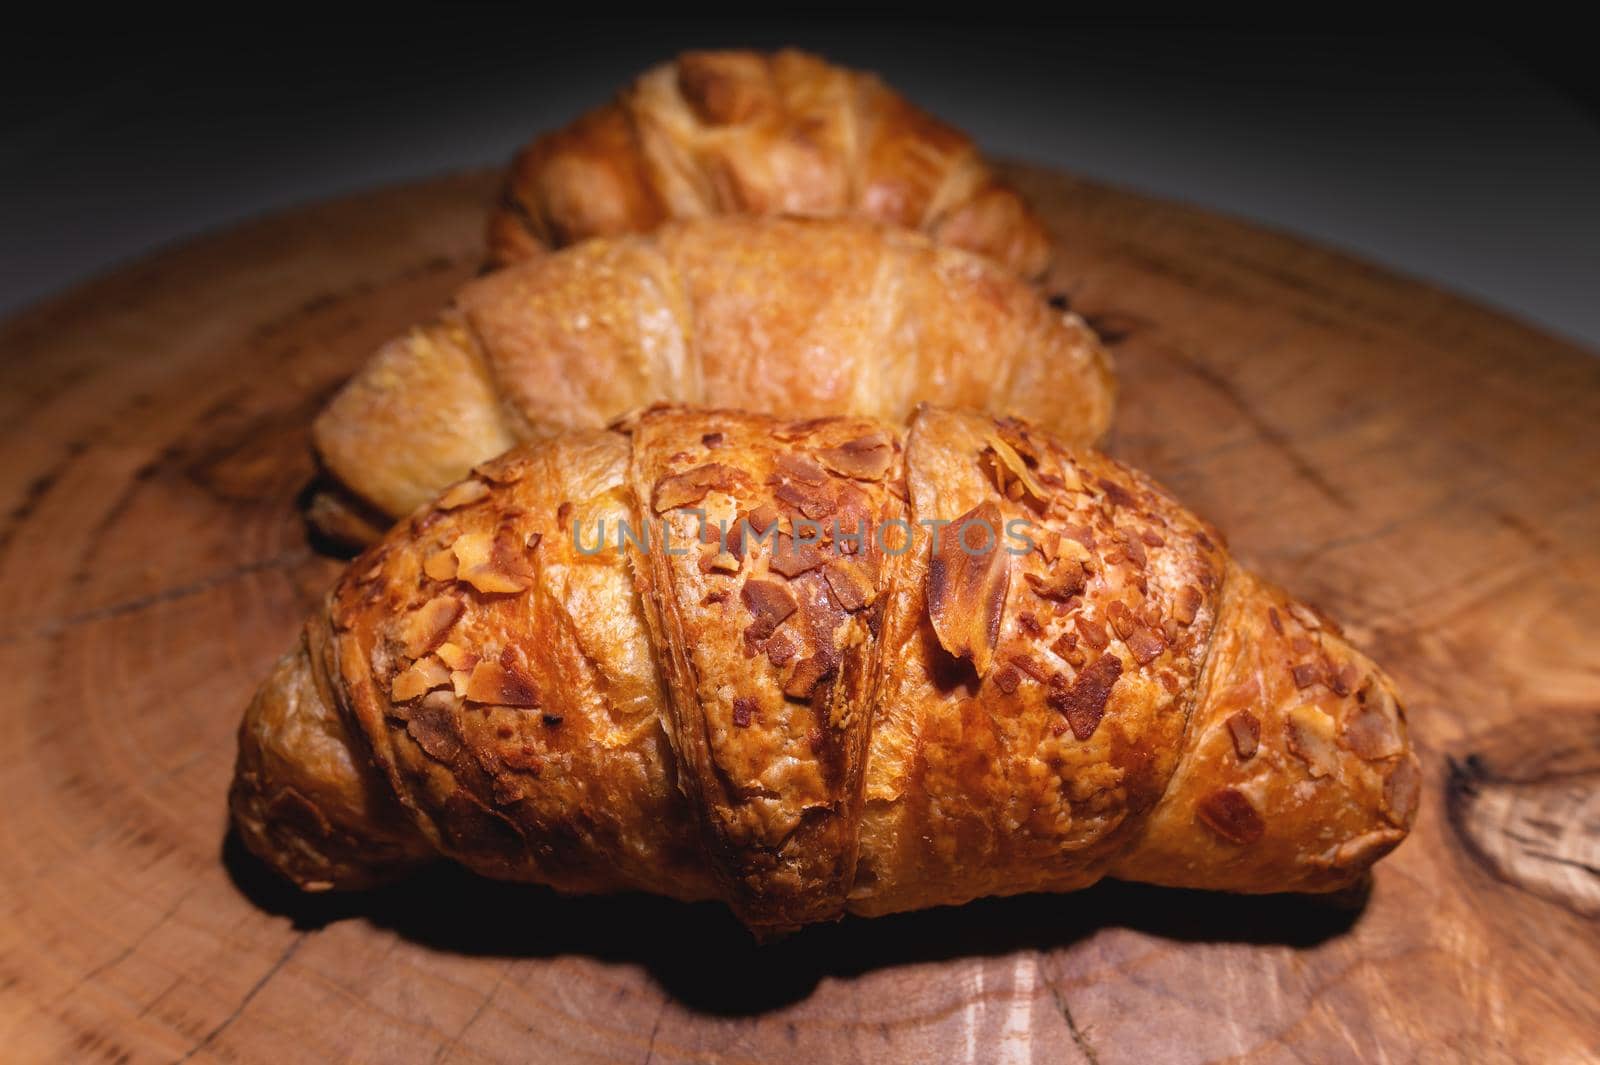 Close-up of a pile of three croissants on a wooden board against a dark background. Delicious and healthy breakfast.